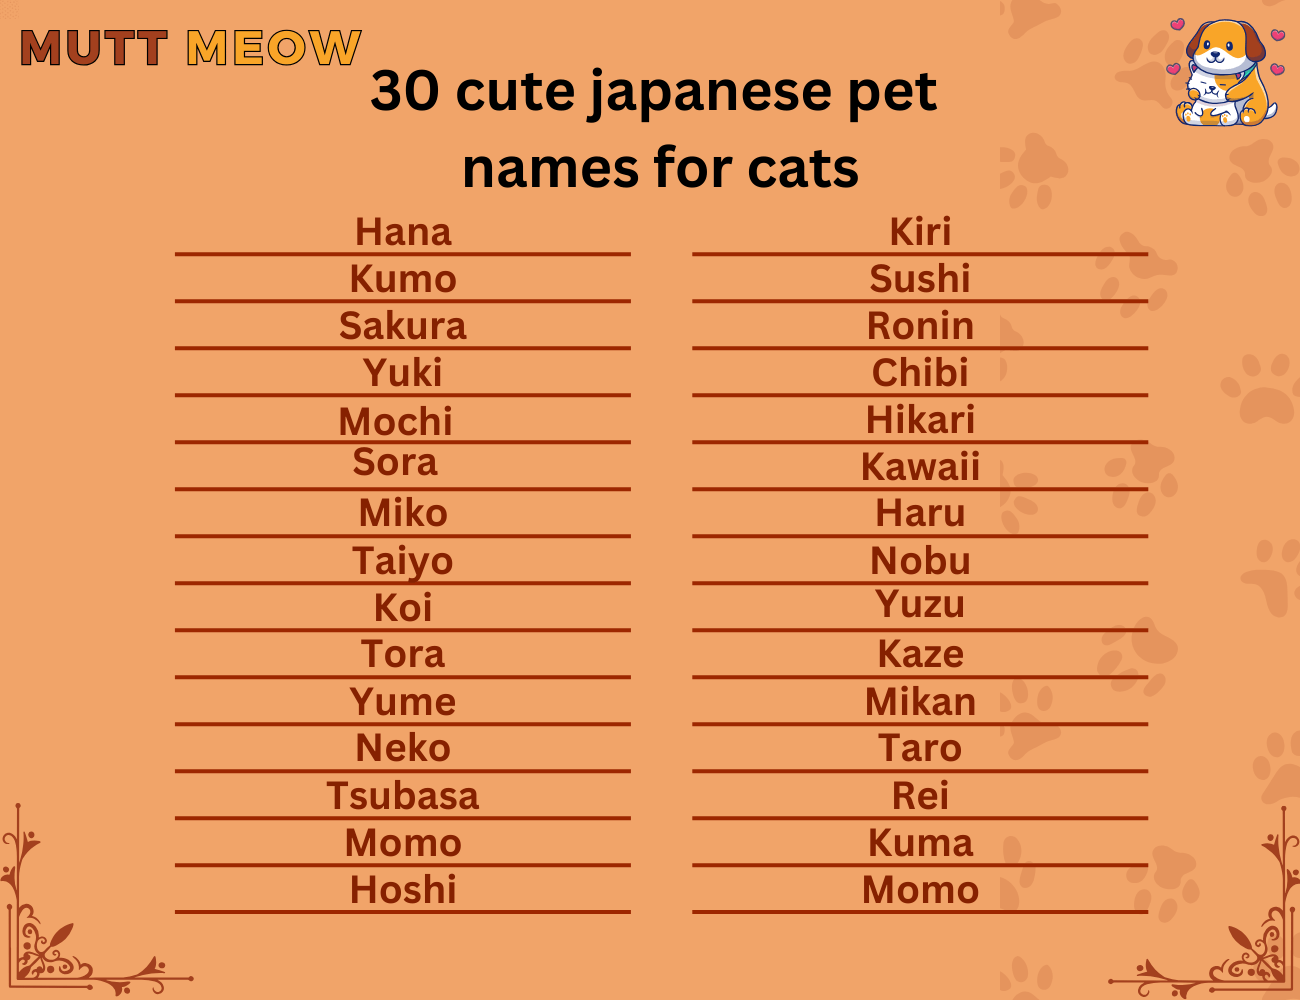 30 cute japanese pet names for cats